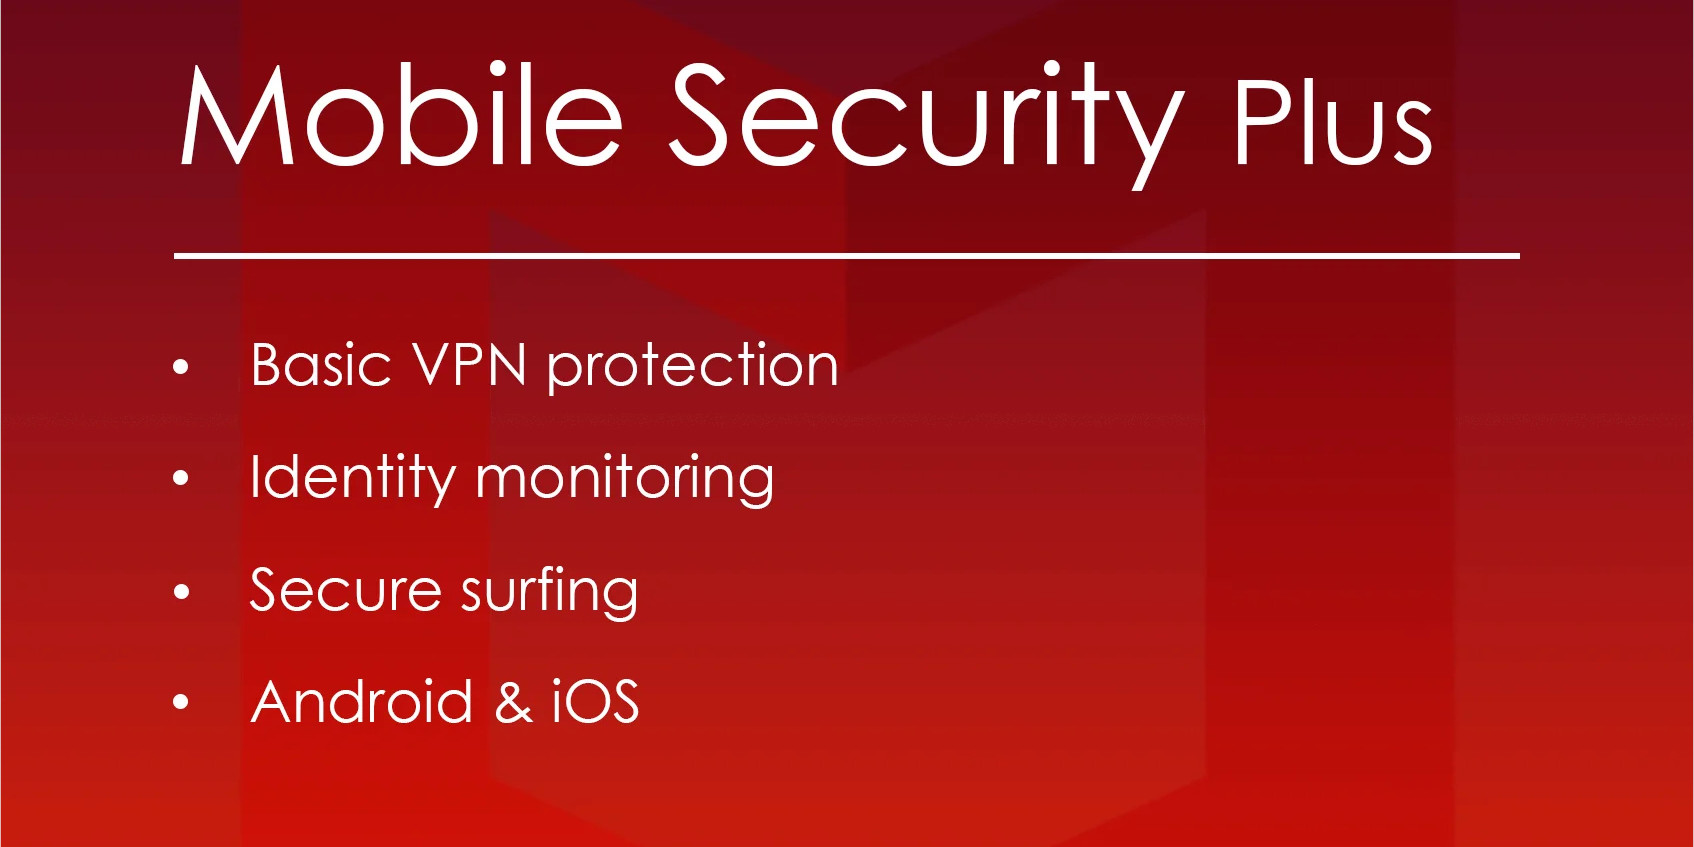 McAfee Mobile Security Plus VPN Key (1 Year / Unlimited Devices) 6.75$